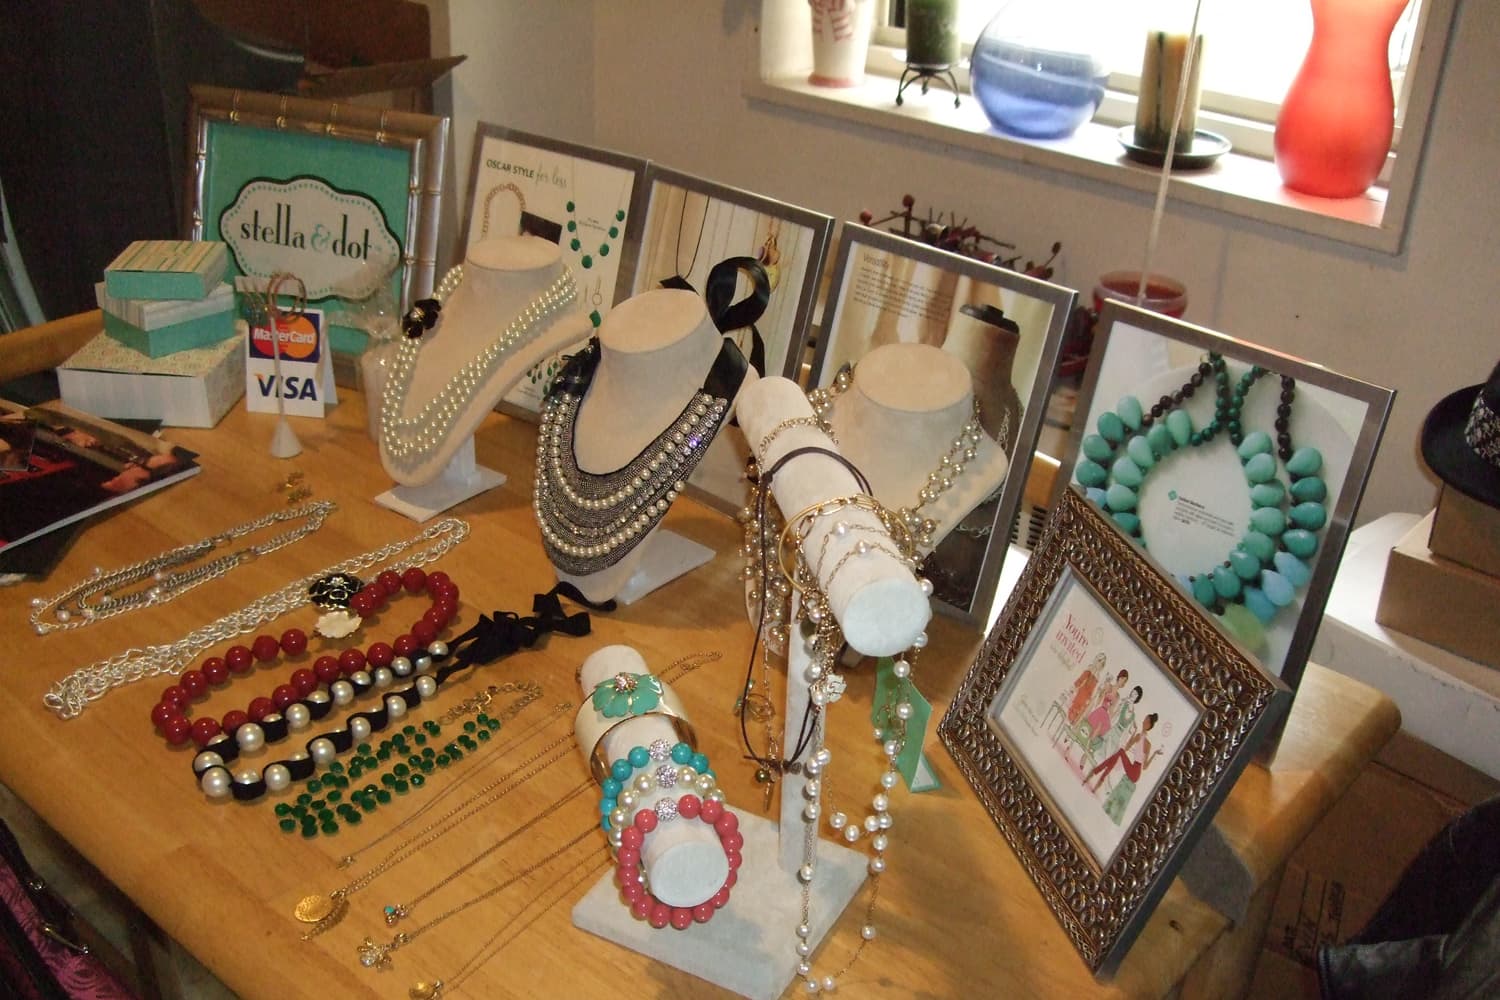 A Stella & Dot display table at an in-home jewelry selling party. (Kim/Flickr/Creative Commons)